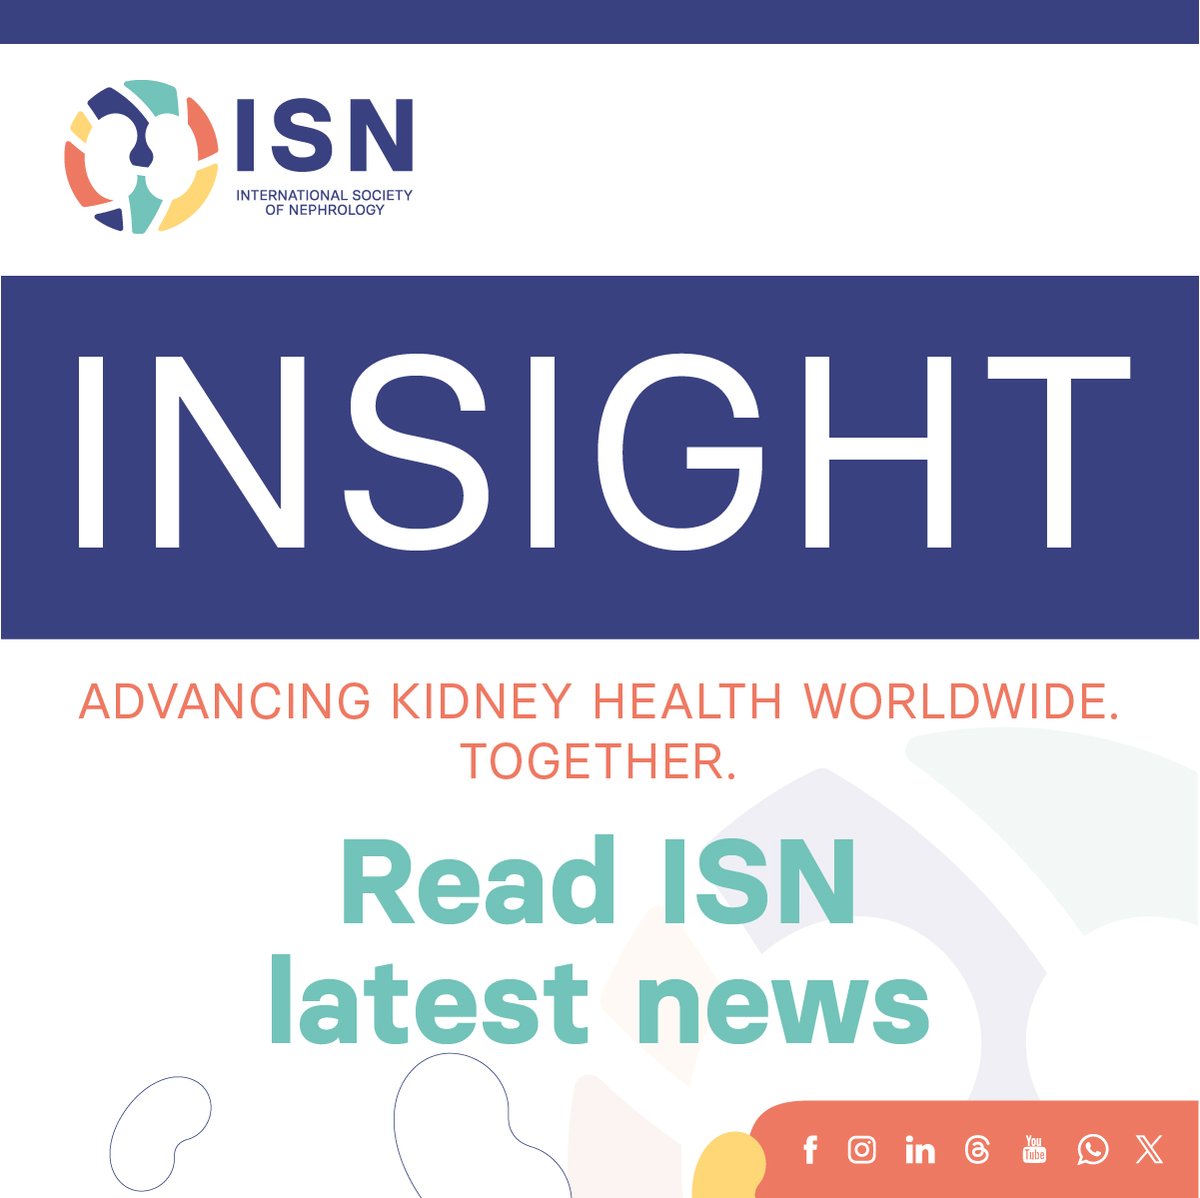 𝗜𝗡𝗦𝗜𝗚𝗛𝗧, our newsletter is out! Check out the latest news about: • Access WCN sessions at the ISN Academy • Toolkit on Creating a Young Nephrologists Committee • @SLANH_ joining ISN as a Collective-member society • Upcoming deadlines of Clinical Research Program, ISN…